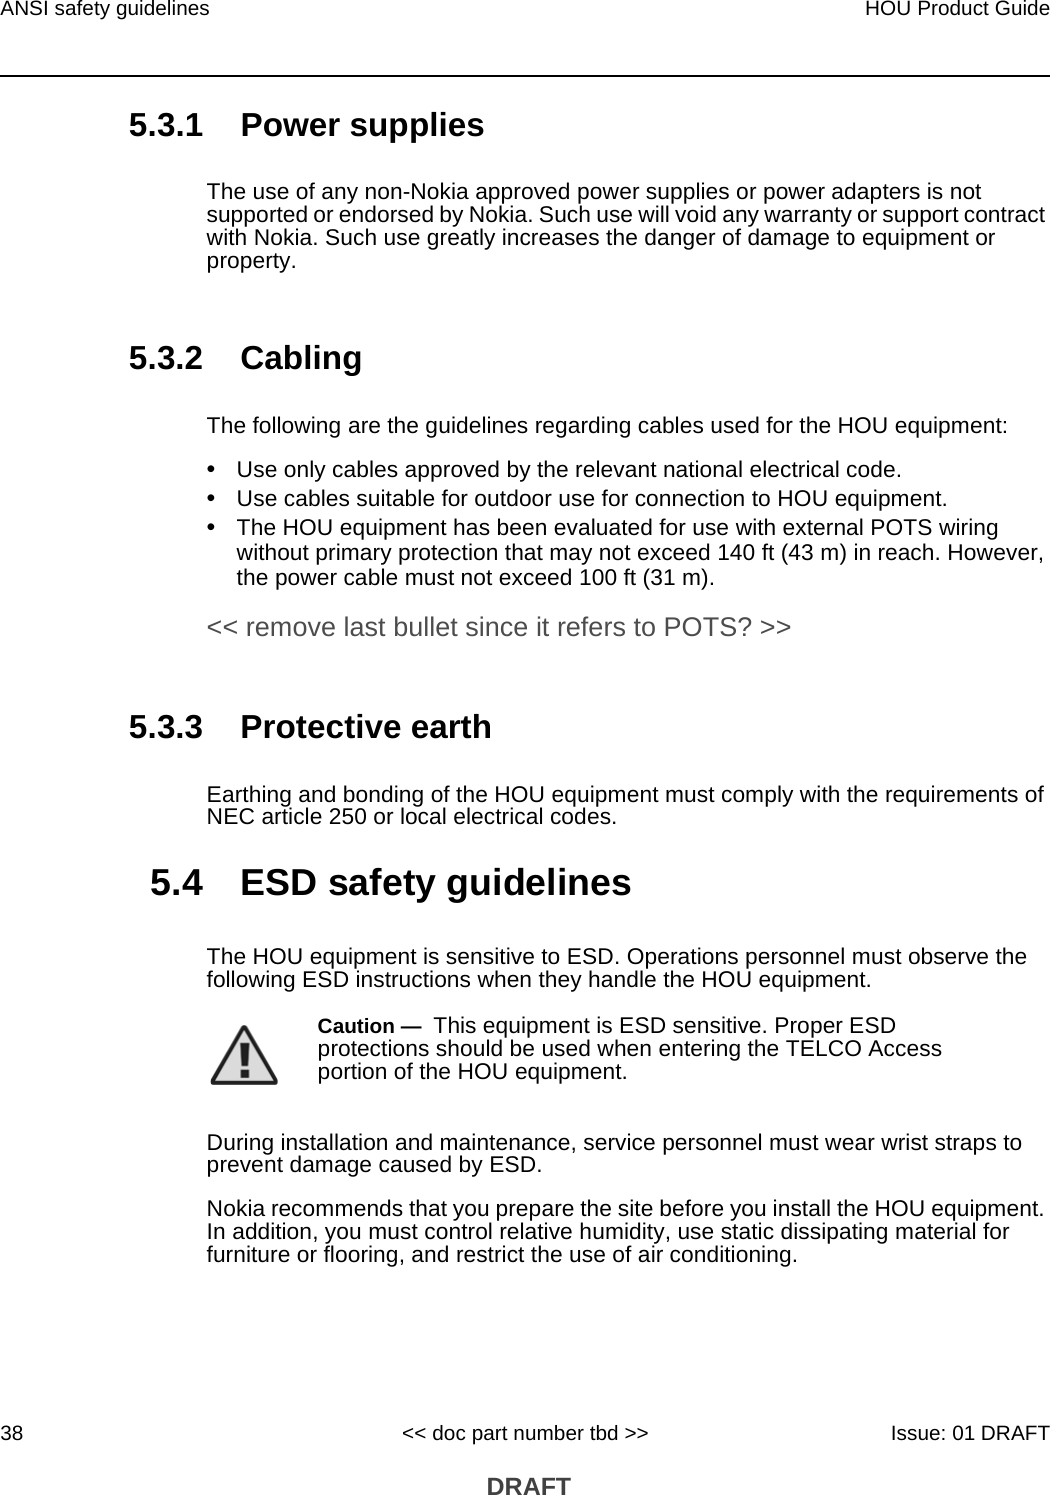 ANSI safety guidelines38HOU Product Guide&lt;&lt; doc part number tbd &gt;&gt; Issue: 01 DRAFT DRAFT5.3.1 Power suppliesThe use of any non-Nokia approved power supplies or power adapters is not supported or endorsed by Nokia. Such use will void any warranty or support contract with Nokia. Such use greatly increases the danger of damage to equipment or property.5.3.2 CablingThe following are the guidelines regarding cables used for the HOU equipment:•Use only cables approved by the relevant national electrical code.•Use cables suitable for outdoor use for connection to HOU equipment.•The HOU equipment has been evaluated for use with external POTS wiring without primary protection that may not exceed 140 ft (43 m) in reach. However, the power cable must not exceed 100 ft (31 m). &lt;&lt; remove last bullet since it refers to POTS? &gt;&gt;5.3.3 Protective earthEarthing and bonding of the HOU equipment must comply with the requirements of NEC article 250 or local electrical codes.5.4 ESD safety guidelinesThe HOU equipment is sensitive to ESD. Operations personnel must observe the following ESD instructions when they handle the HOU equipment. During installation and maintenance, service personnel must wear wrist straps to prevent damage caused by ESD.Nokia recommends that you prepare the site before you install the HOU equipment. In addition, you must control relative humidity, use static dissipating material for furniture or flooring, and restrict the use of air conditioning.Caution —  This equipment is ESD sensitive. Proper ESD protections should be used when entering the TELCO Access portion of the HOU equipment.